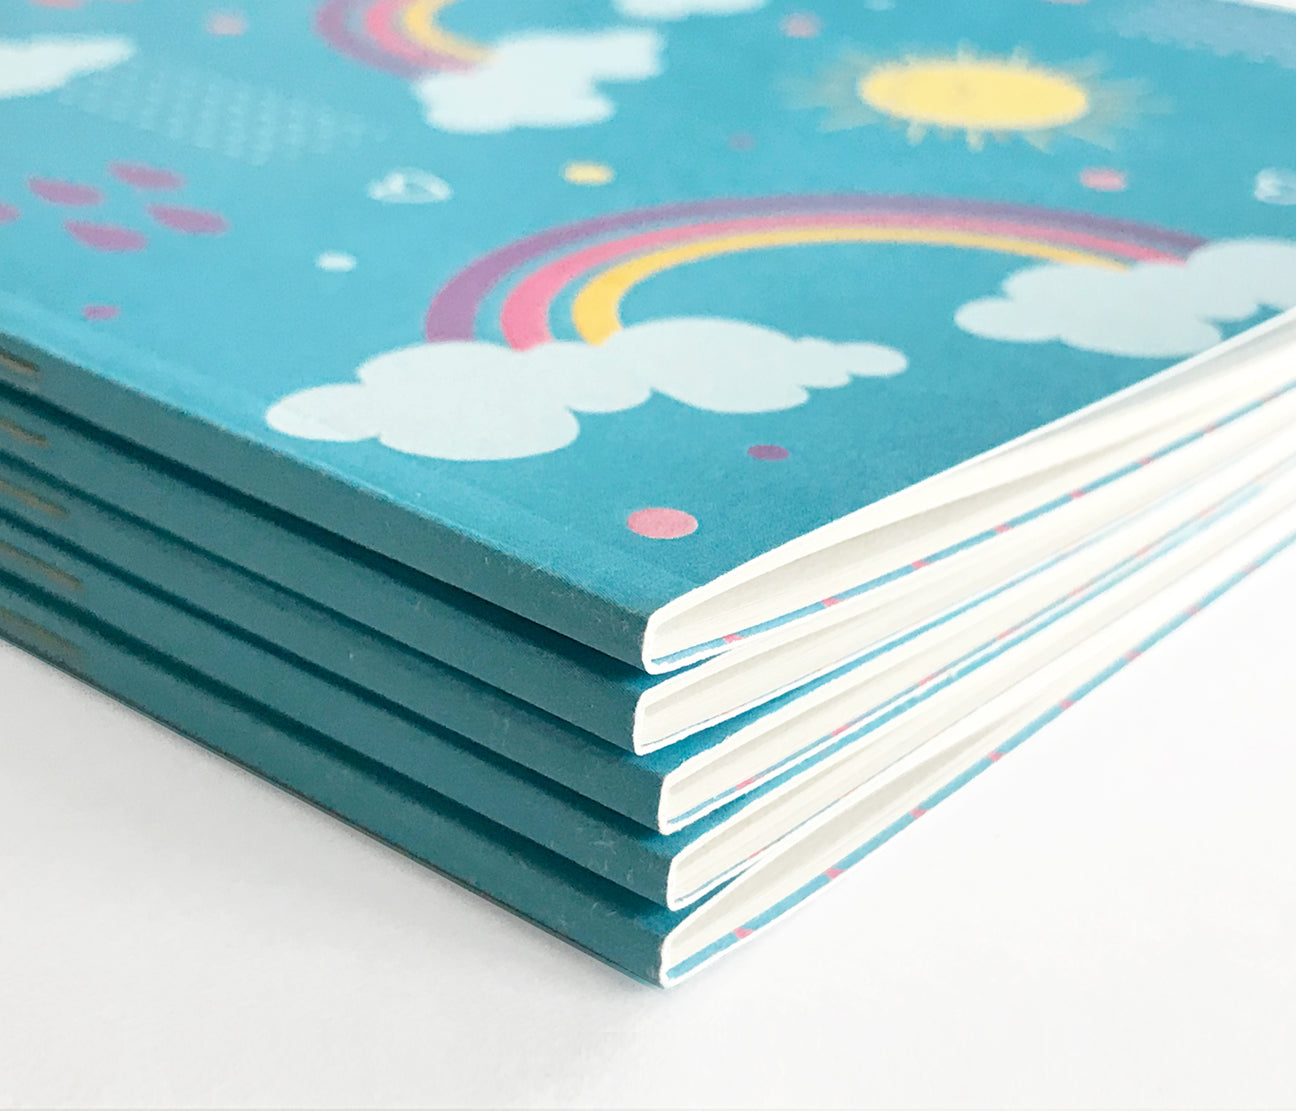 Rainbow recycled notebooks - The Imagination Spot